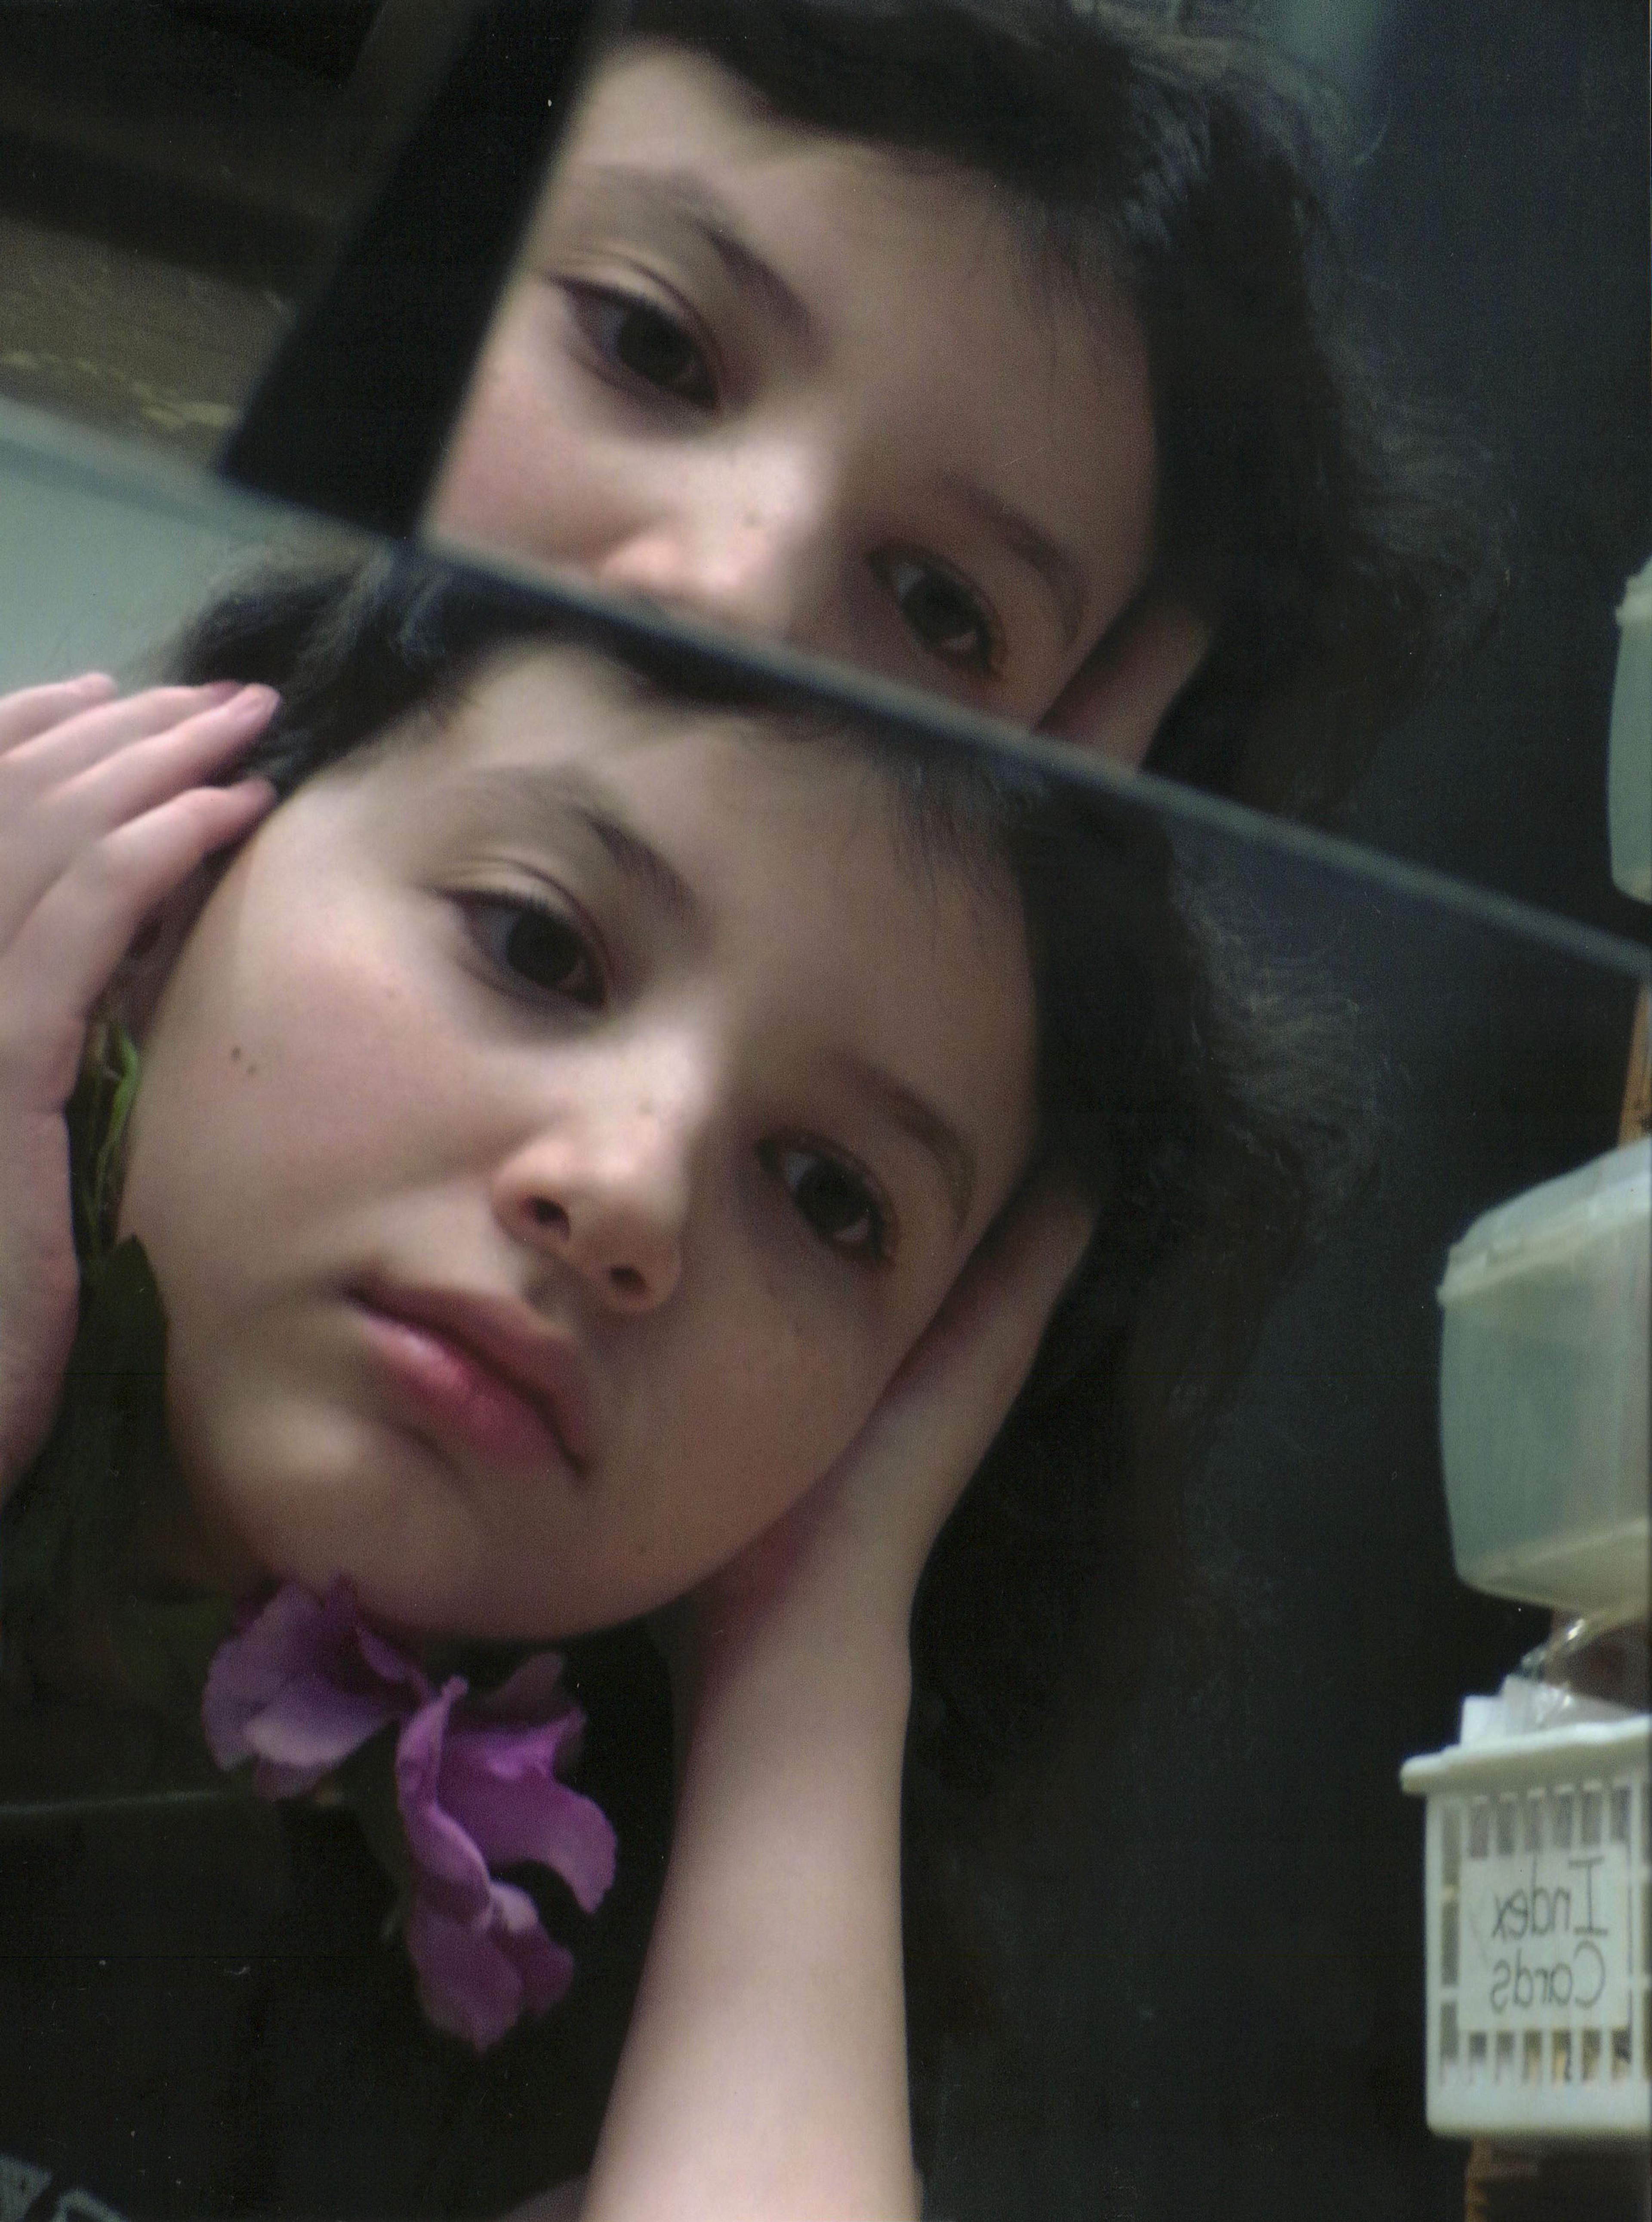 Color close-up photo of a young white girl with dark hair, captured in the reflective surfaces of two mirrors, one directly in front of the other. In the lower mirror, the girl is holding both hands over her ears and facing right, away from the camera. A violet flower dangles horizontally just beneath her chin. In the top mirror, only the nose, eyes, and hair on top of the girl are visible. A small, white plastic container is cropped out on the lower right side of the bottom mirror. The words "Index Cards" appear reversed in the mirror's reflection on a small sign affixed to the container.